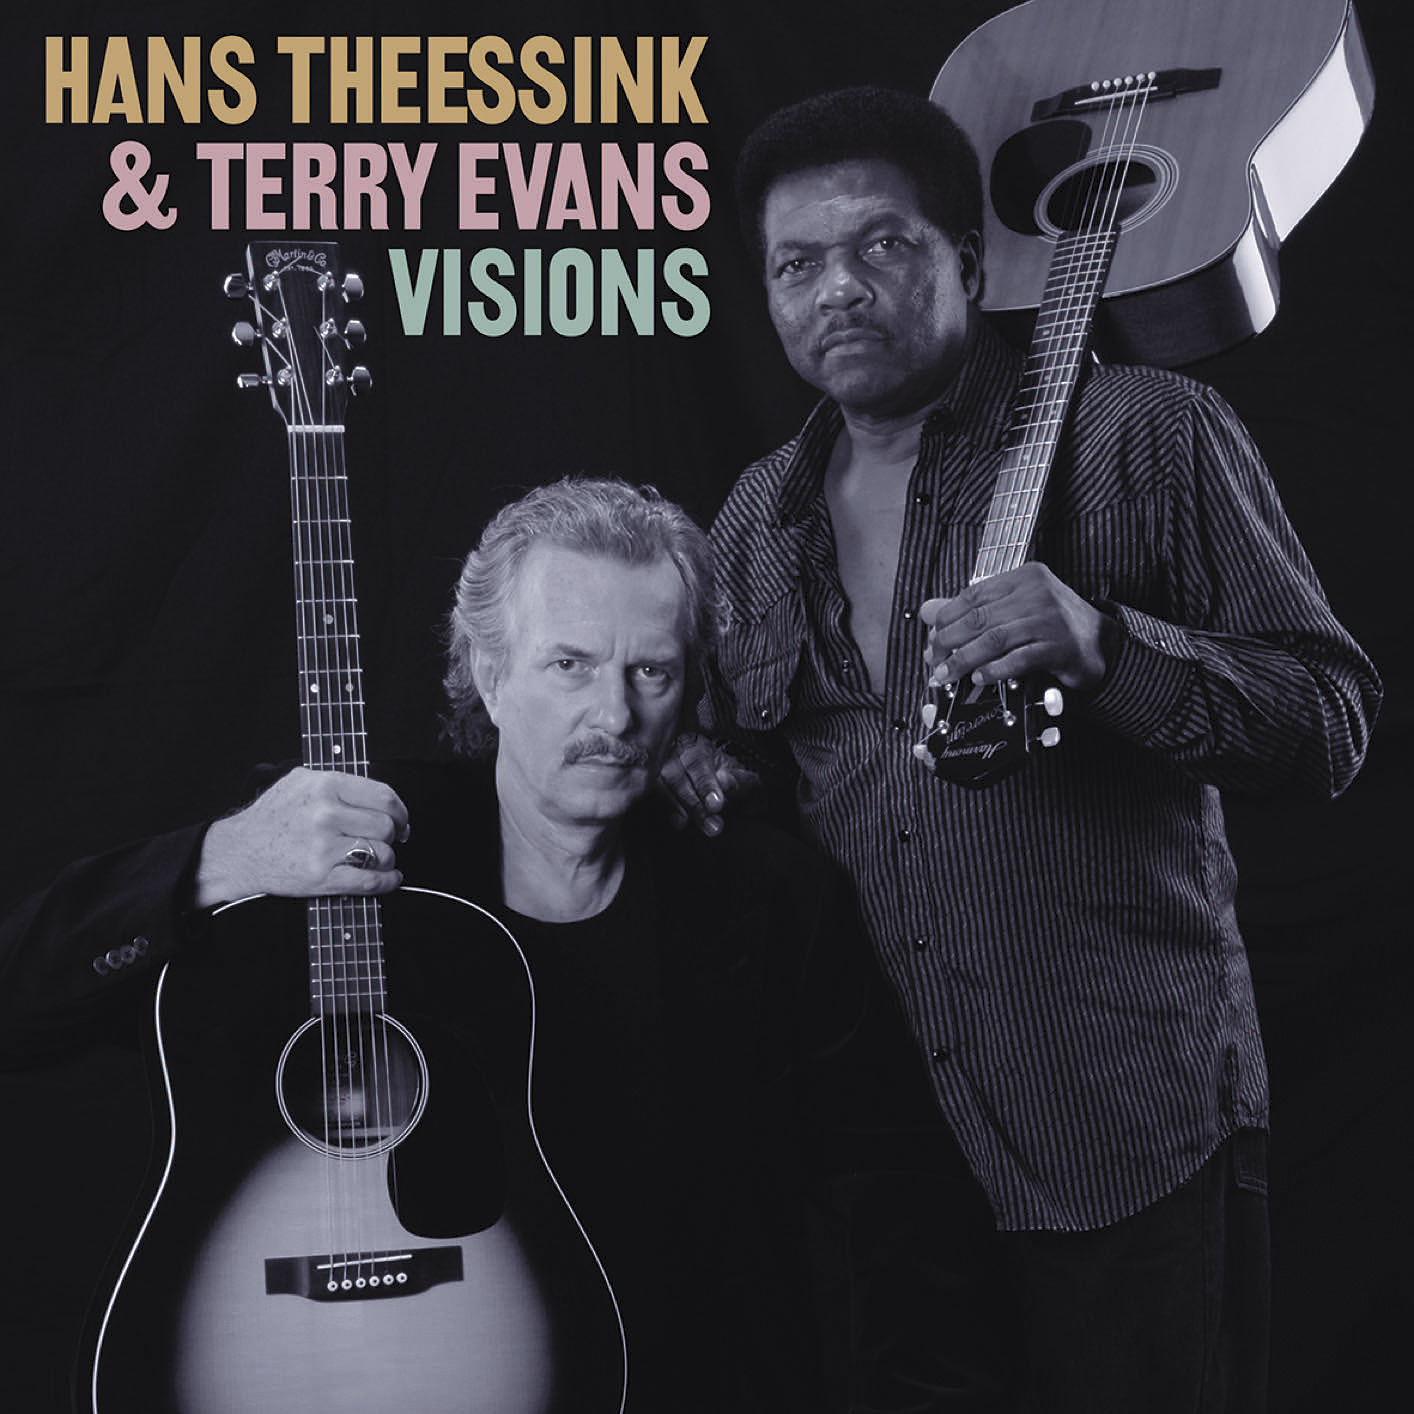 Hans Theessink and Terry Evans - Visions (2008/2016) [HighResAudio DSF DSD64/2.82MHz + FLAC 24bit/88,2kHz]